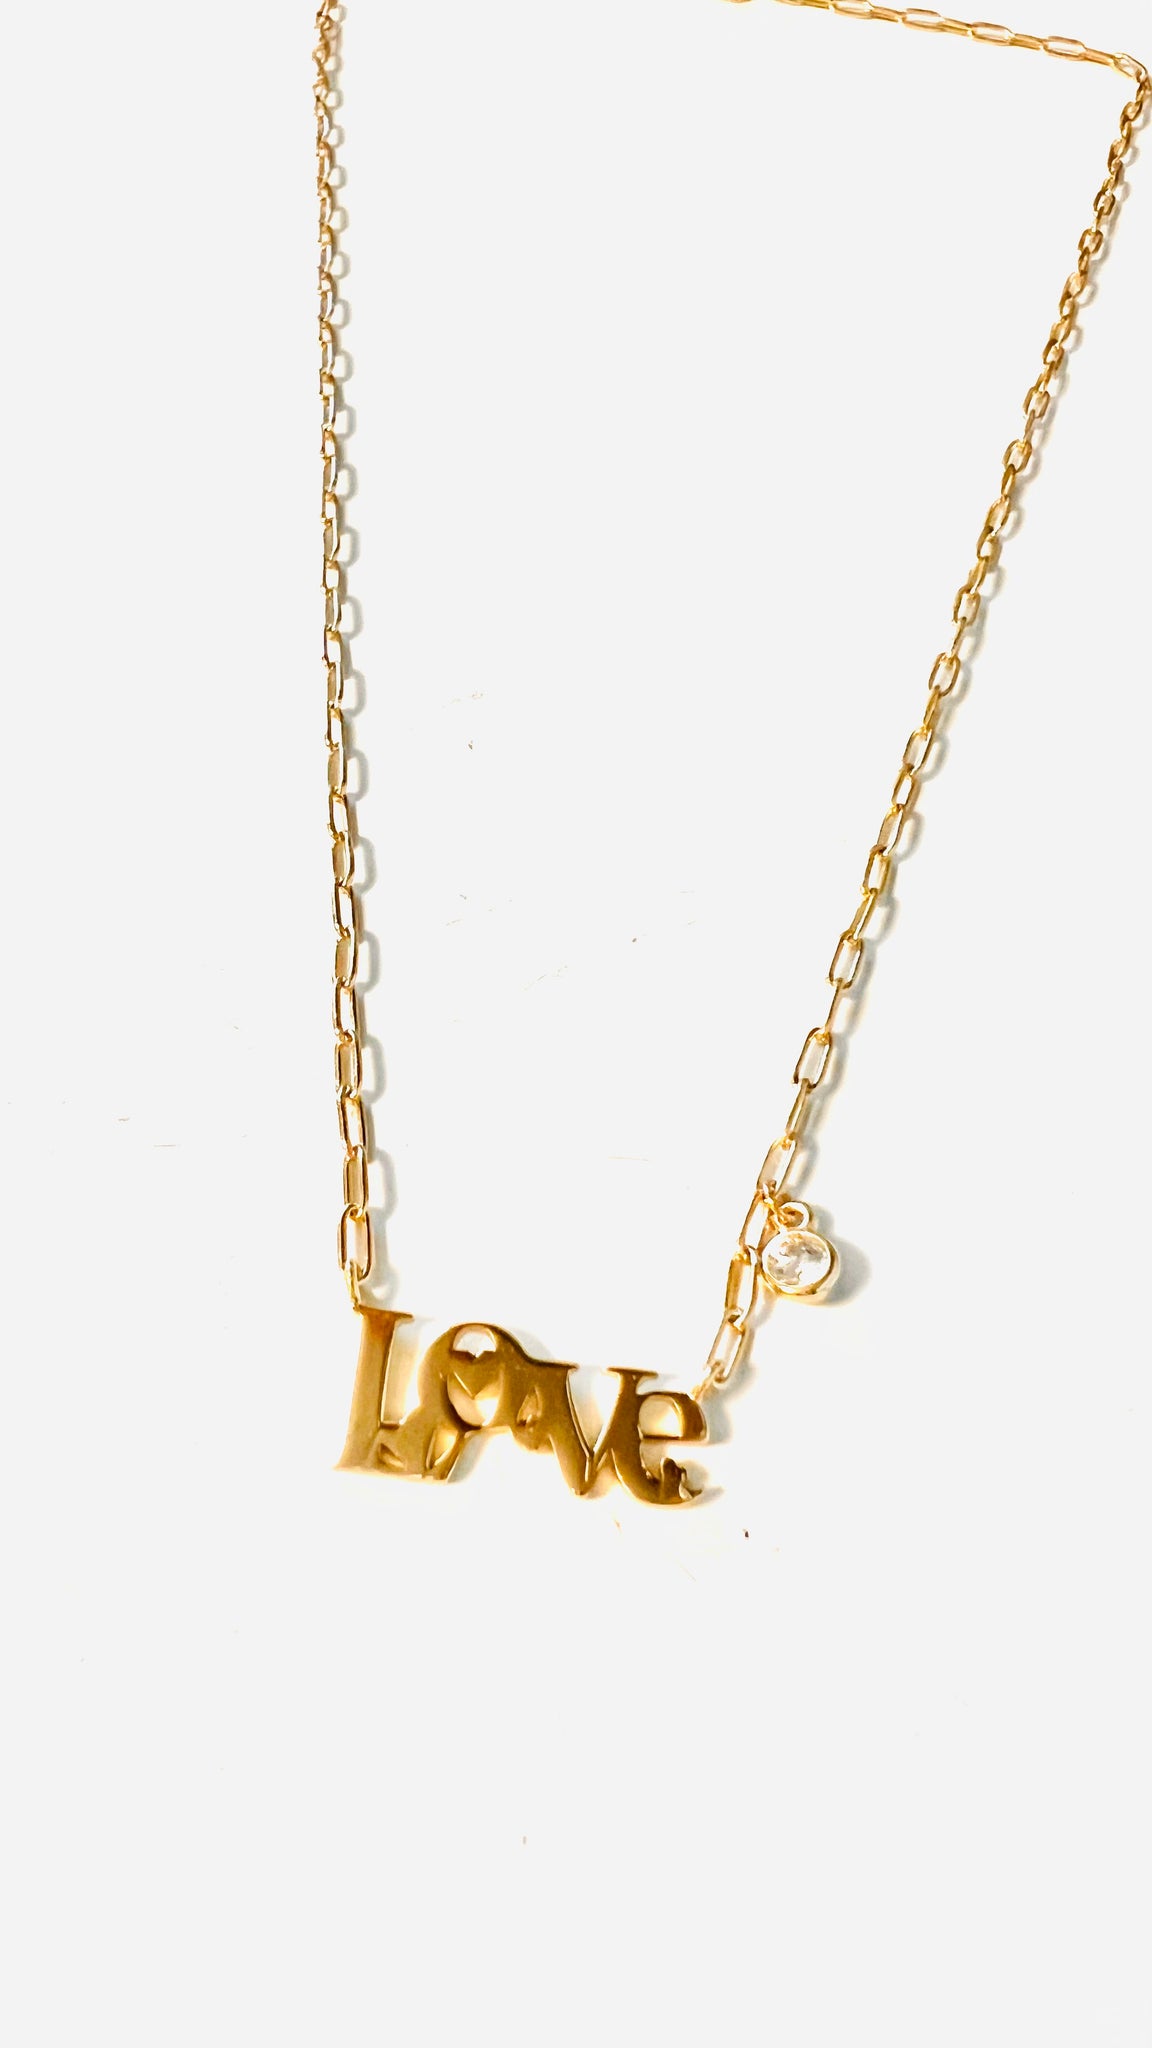 Love Necklace with champagne diamond accent